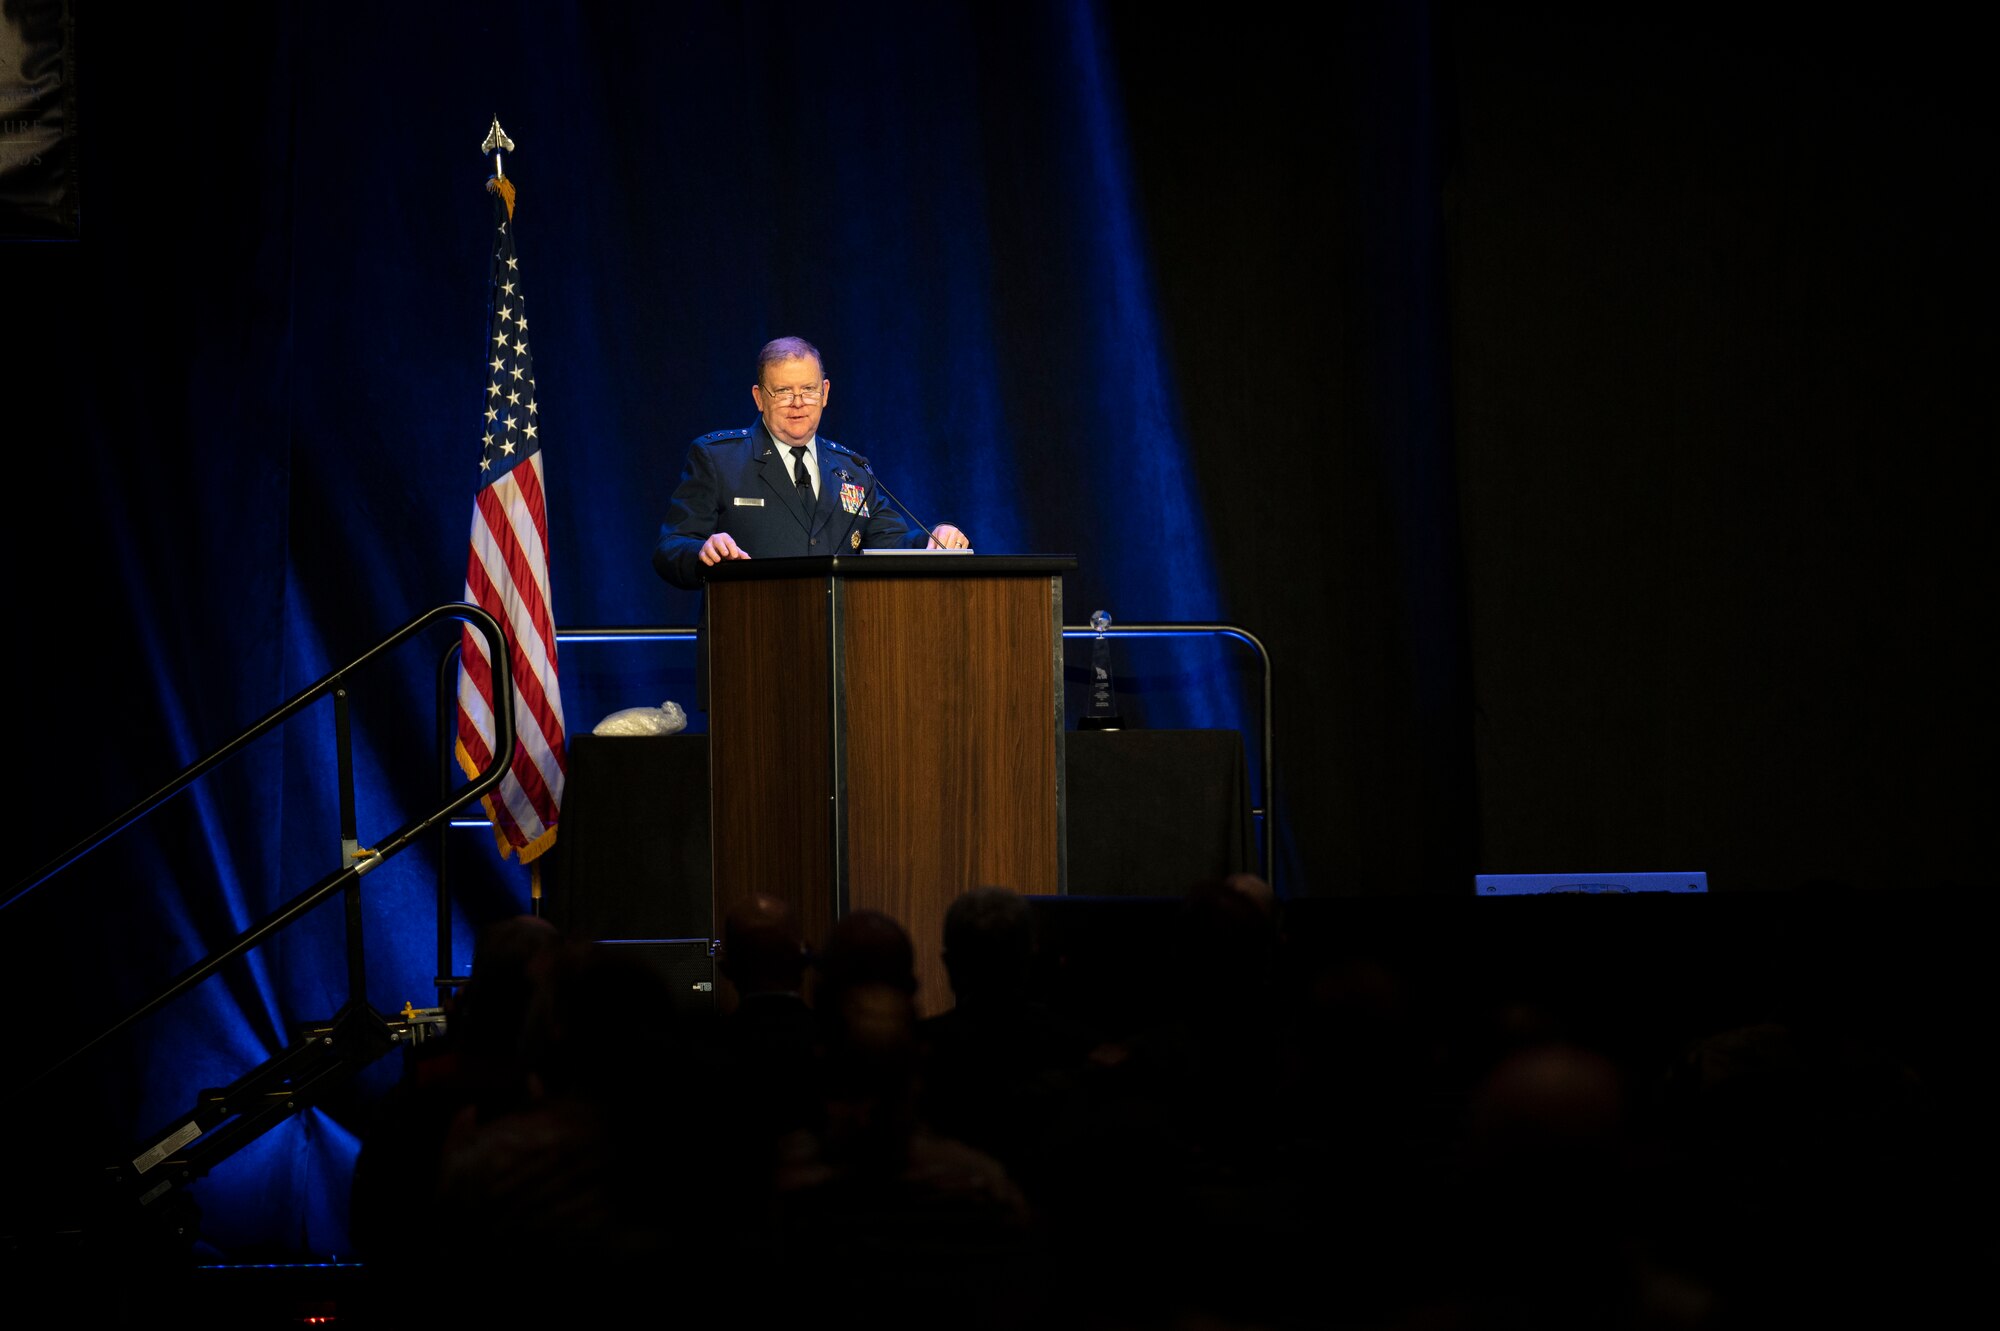 Photo of Lt. Gen. Richard Scobee, chief of the Air Force Reserve and commander of the Air Force Reserve Command, delivering a keynote speech at the 53rd Airlift/Tanker Association Annual Convention, Symposium and Technology Exposition on Oct. 30, in Orlando, Florida.